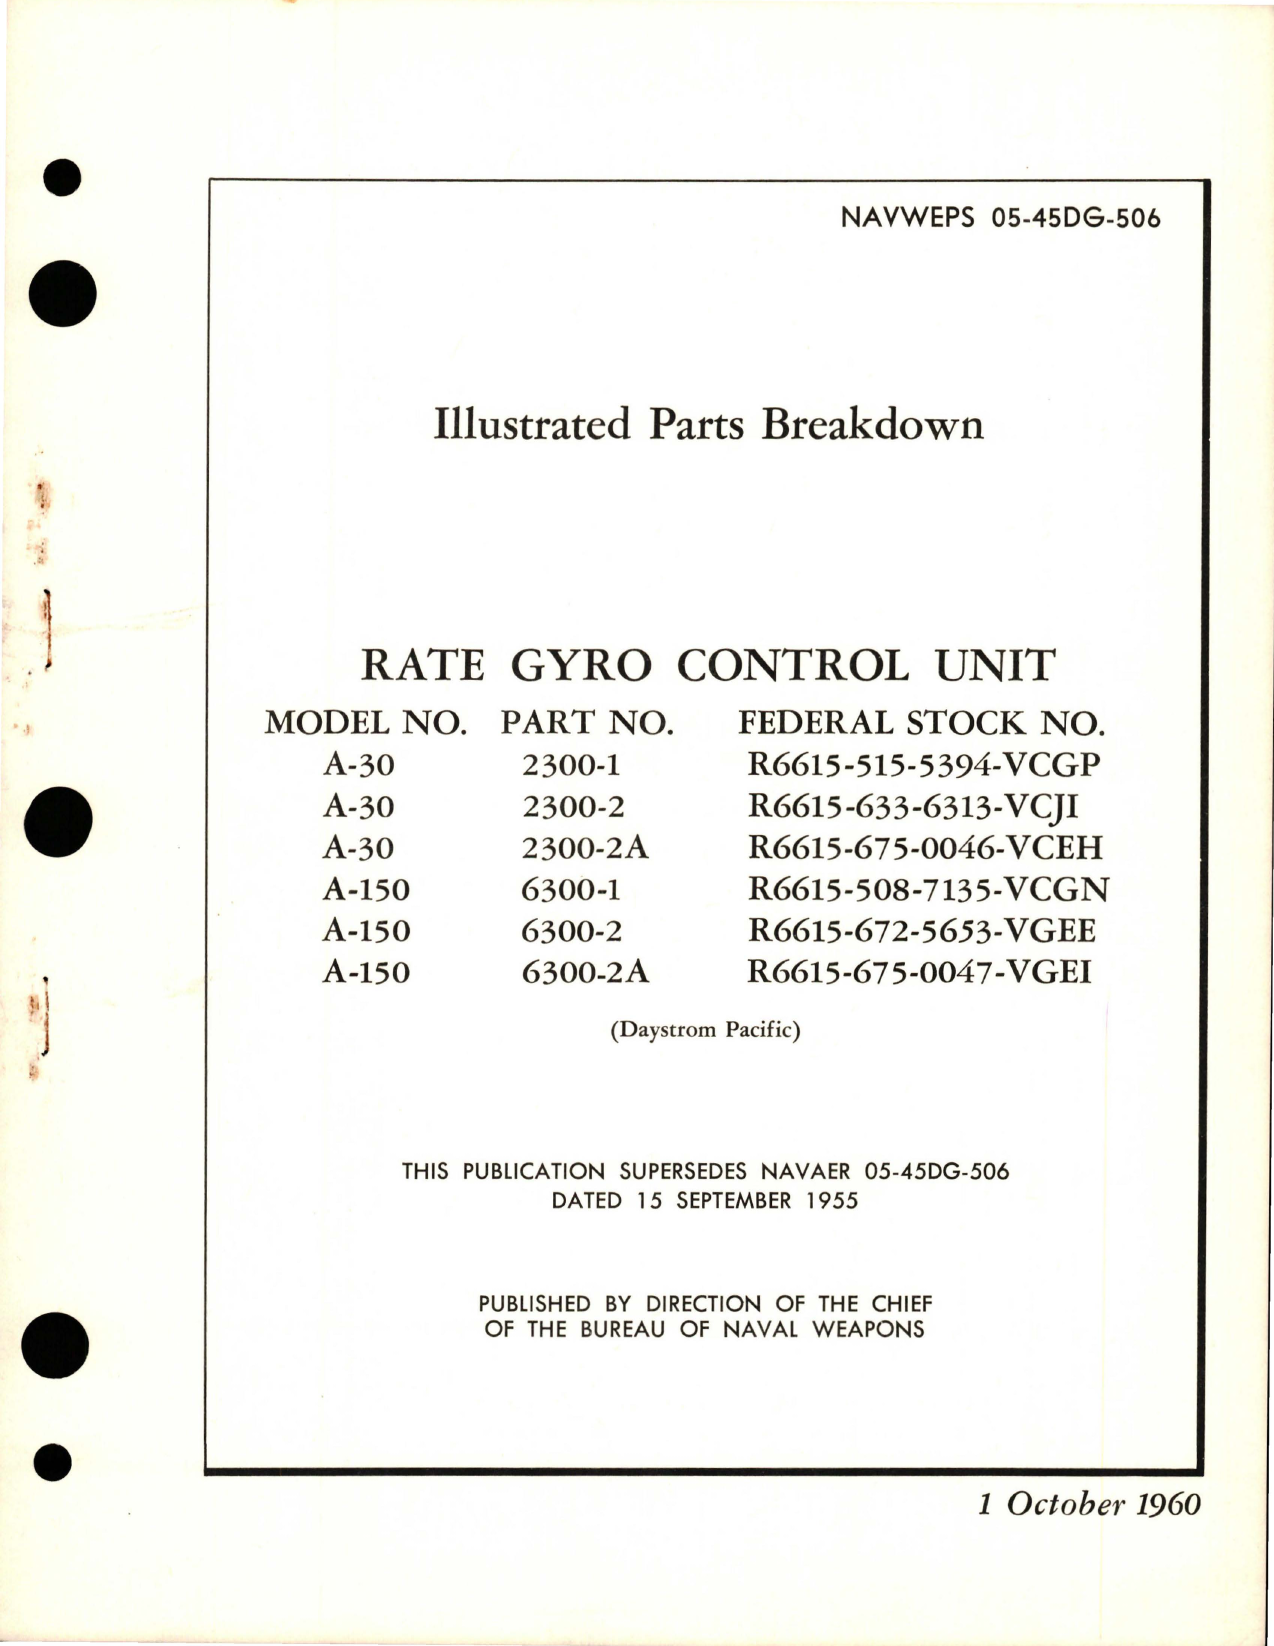 Sample page 1 from AirCorps Library document: Illustrated Parts Breakdown for Rate Gyro Control Unit